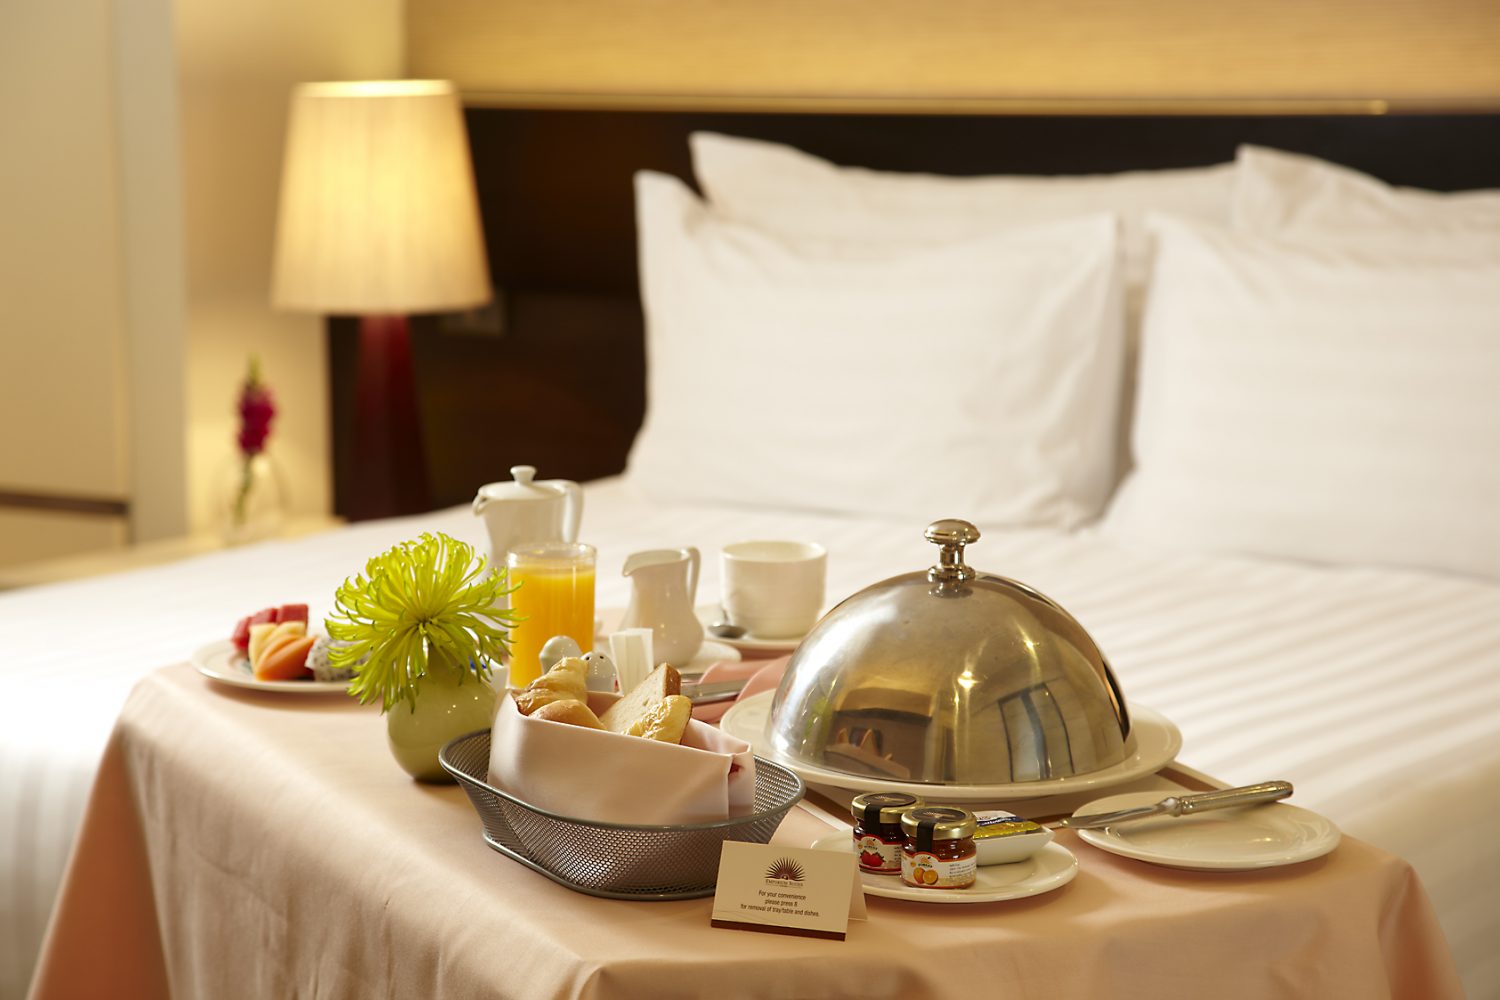 Is Room Service Dead?